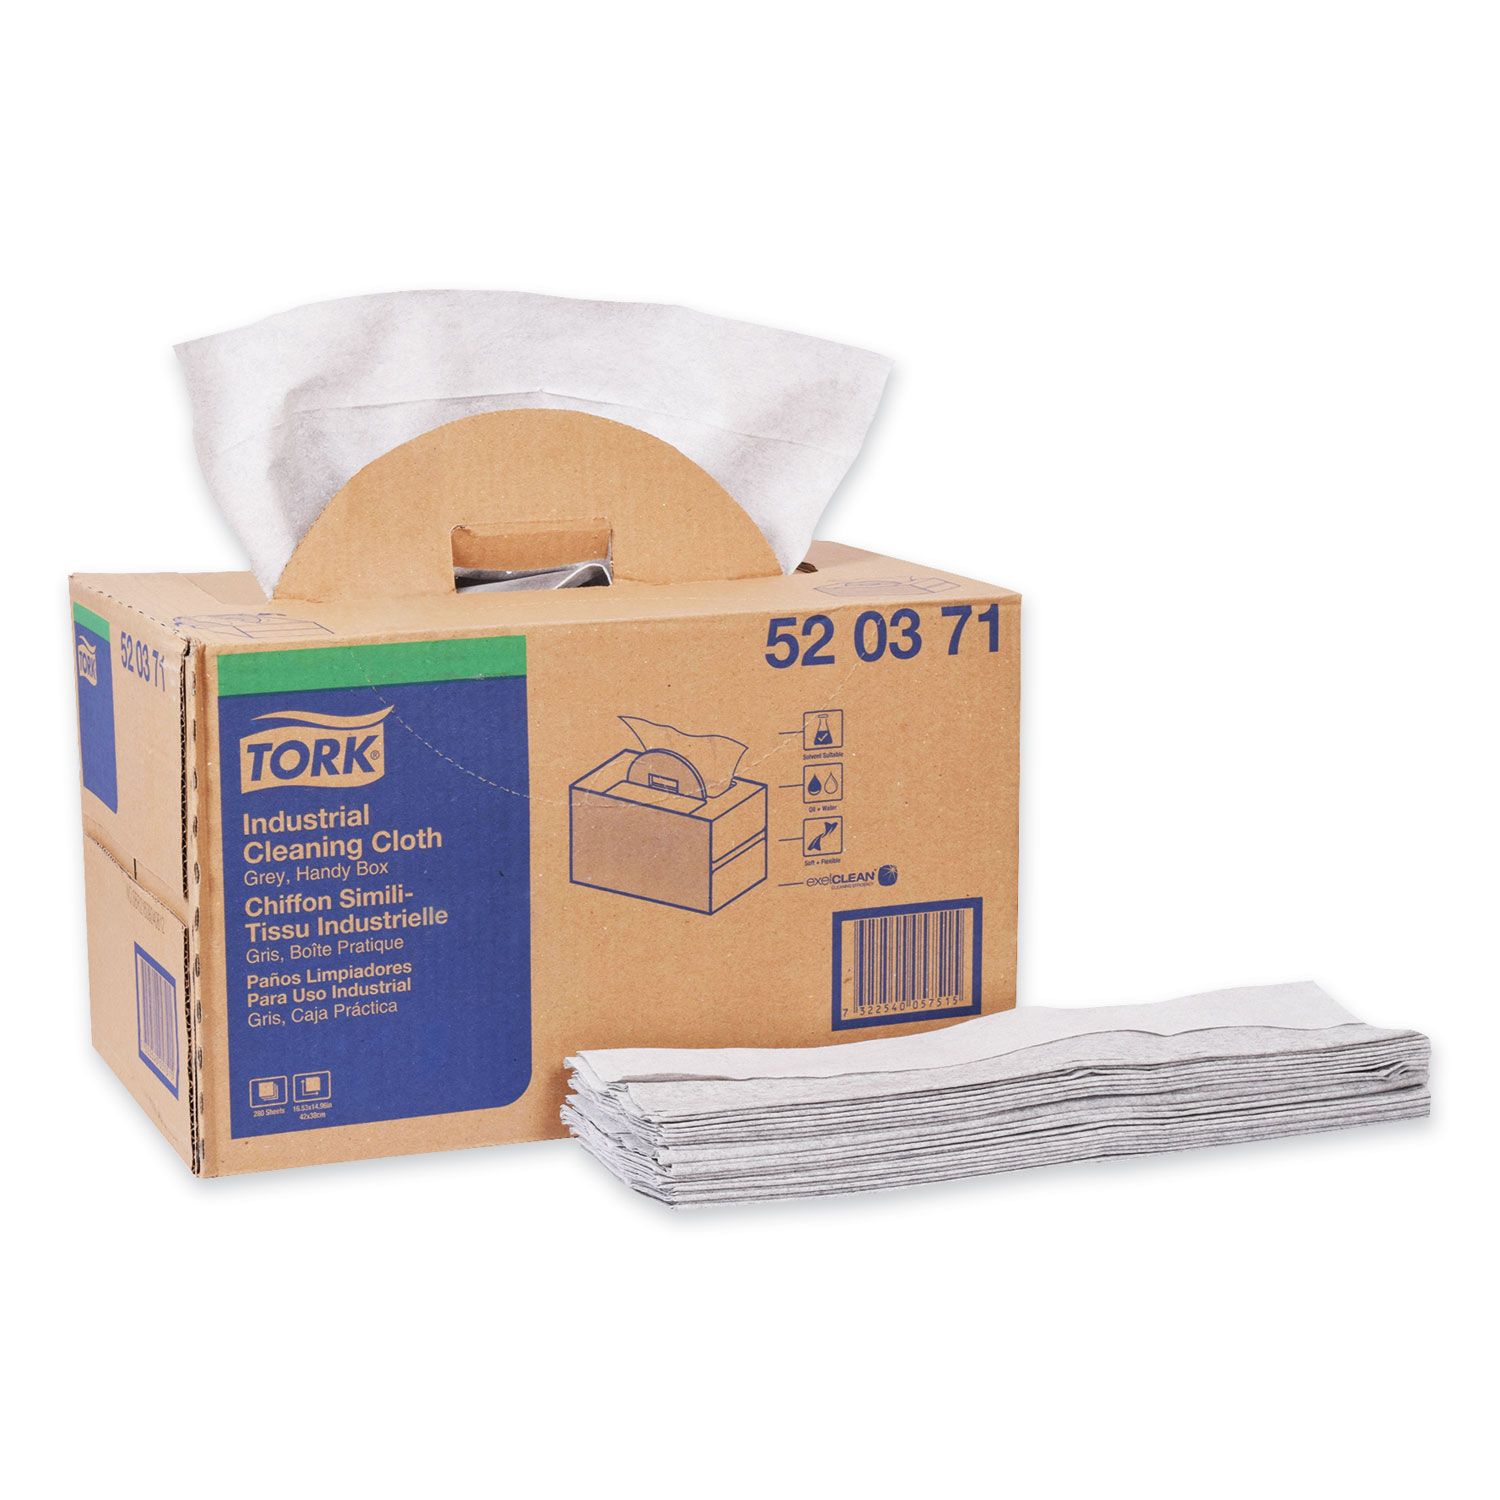  Tork 520371 Industrial Cleaning Cloth Handy Box, 1-Ply, 14 x 16.9, Gray, 280/Pack (TRK520371) 